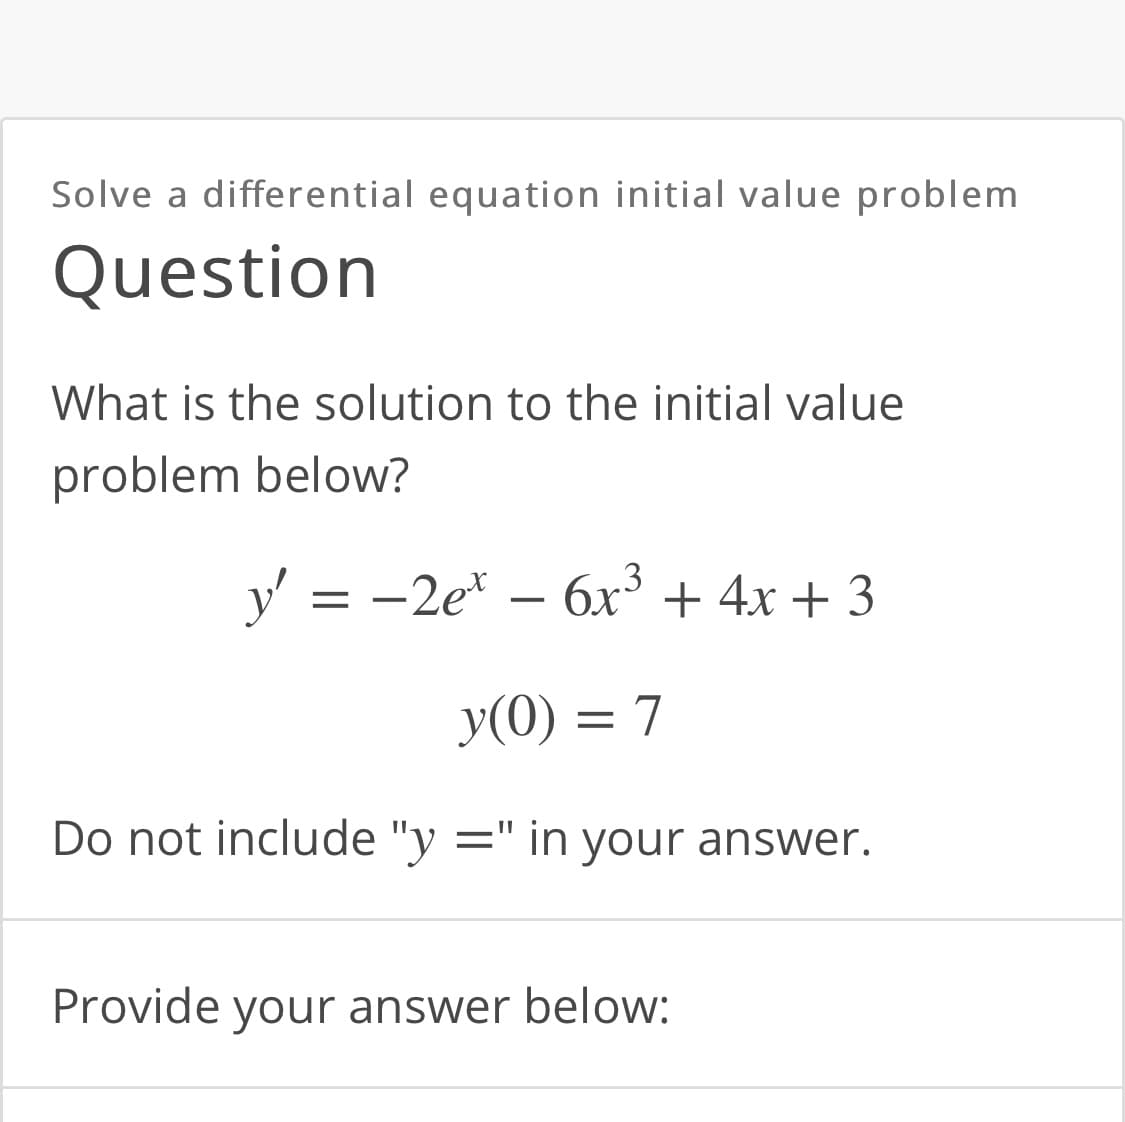 Solve a differential equation initial value problem
Question
What is the solution to the initial value
problem below?
.3
y' = -2e*
6x' + 4x + 3
y(0) = 7
Do not include "y
=" in your answer.
Provide your answer below:
